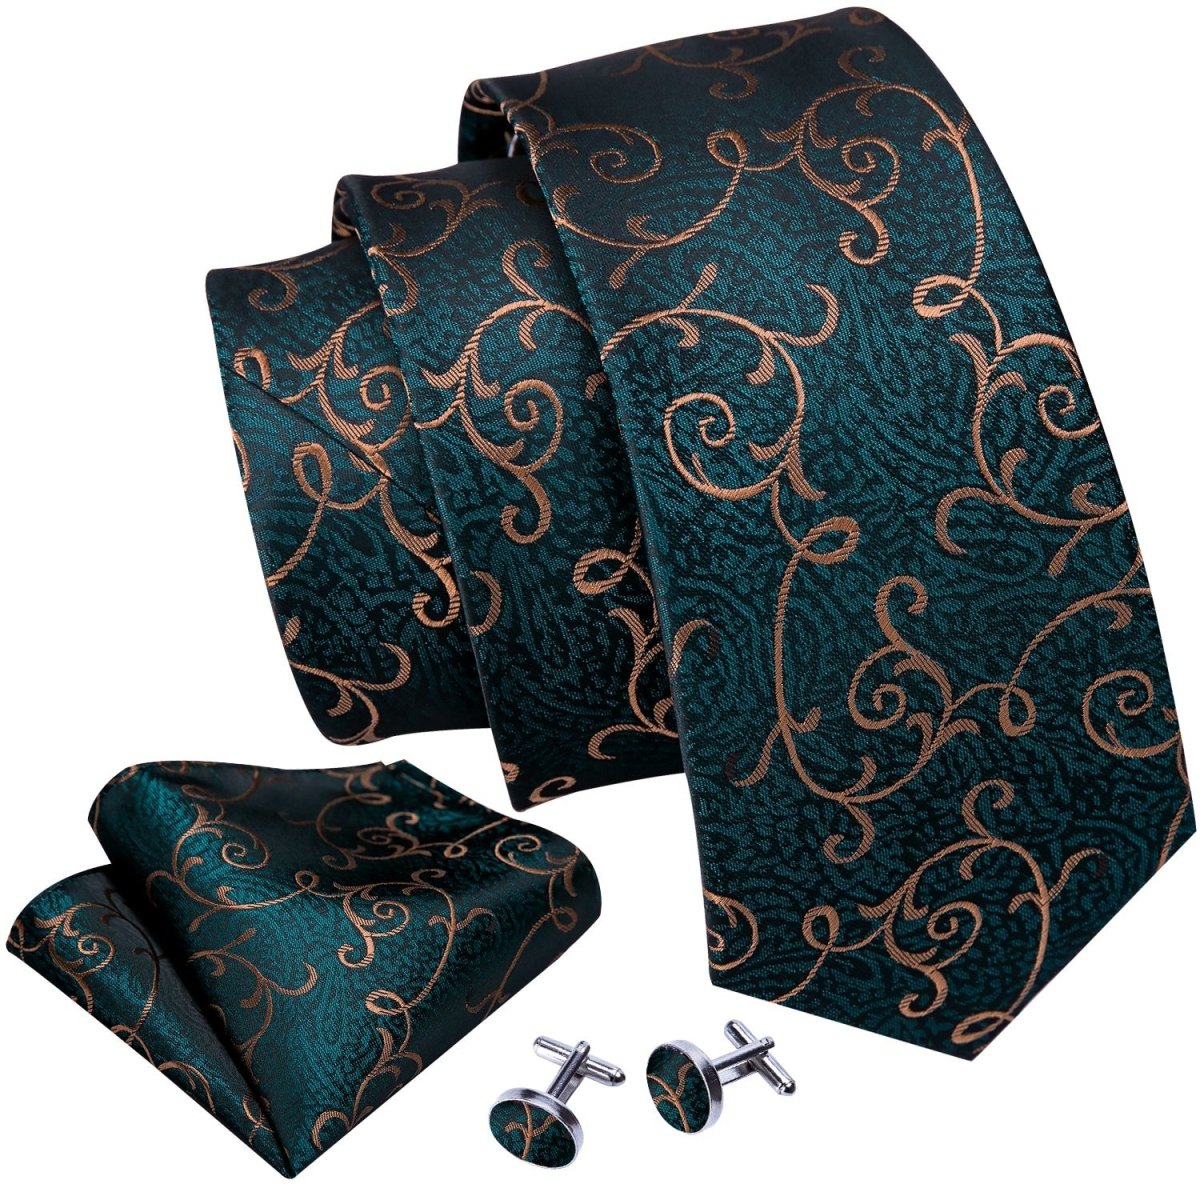 Fontaine Vest and Tie Set - Forest Green